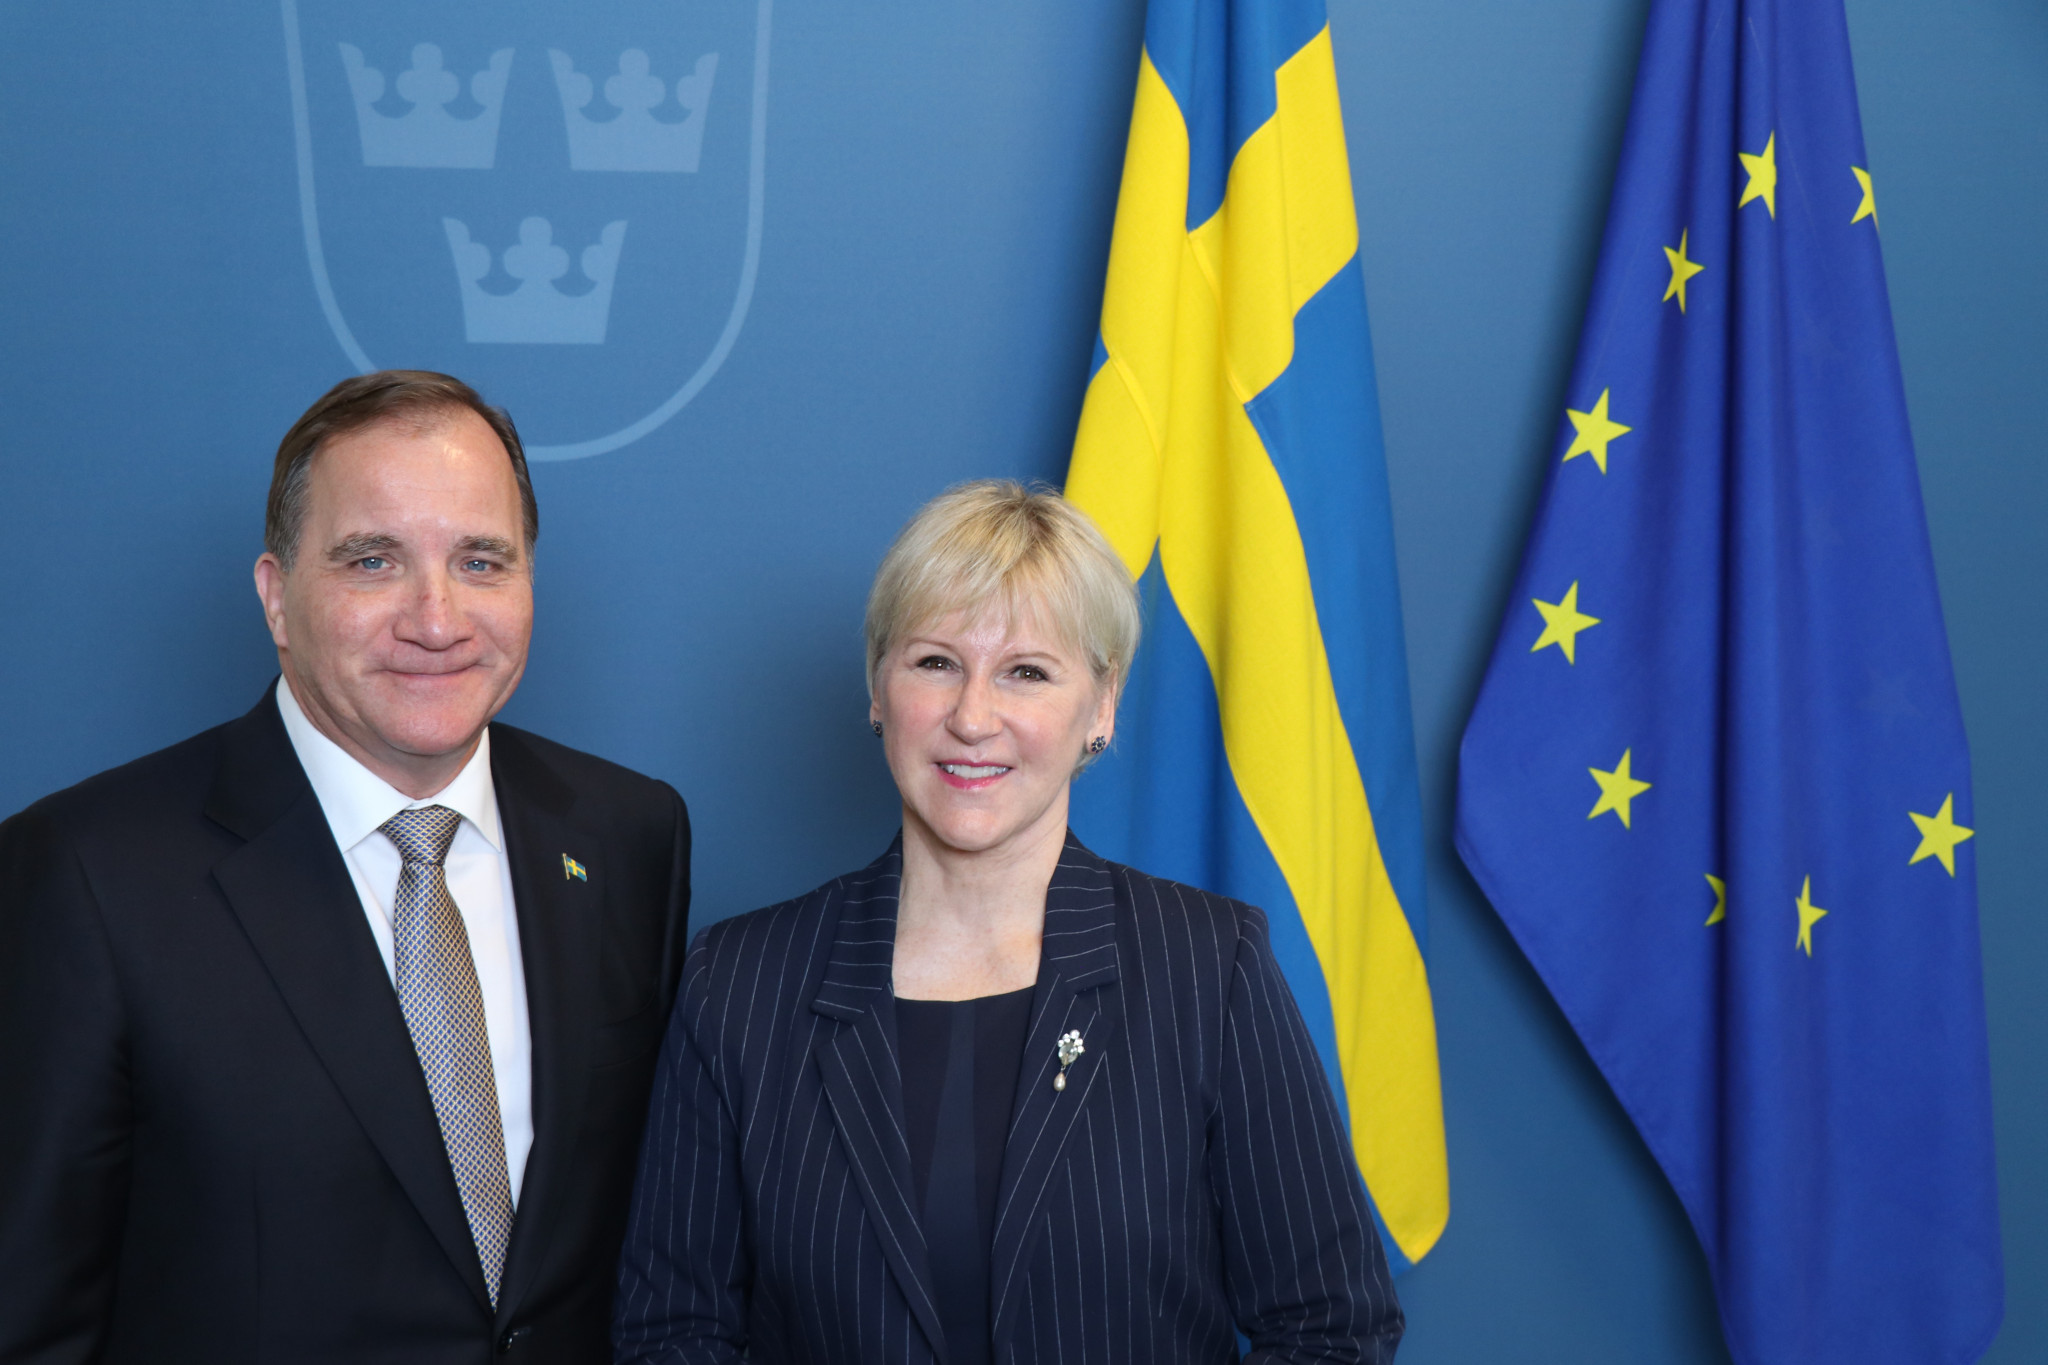 Sweden's Prime Minister Stefan Löfven and the Minister of Foreign Affairs Margot Wallström have thrown their support behind Stockholm Åre 2026 along with other leading politicians and top companies ©Stockholm 2026